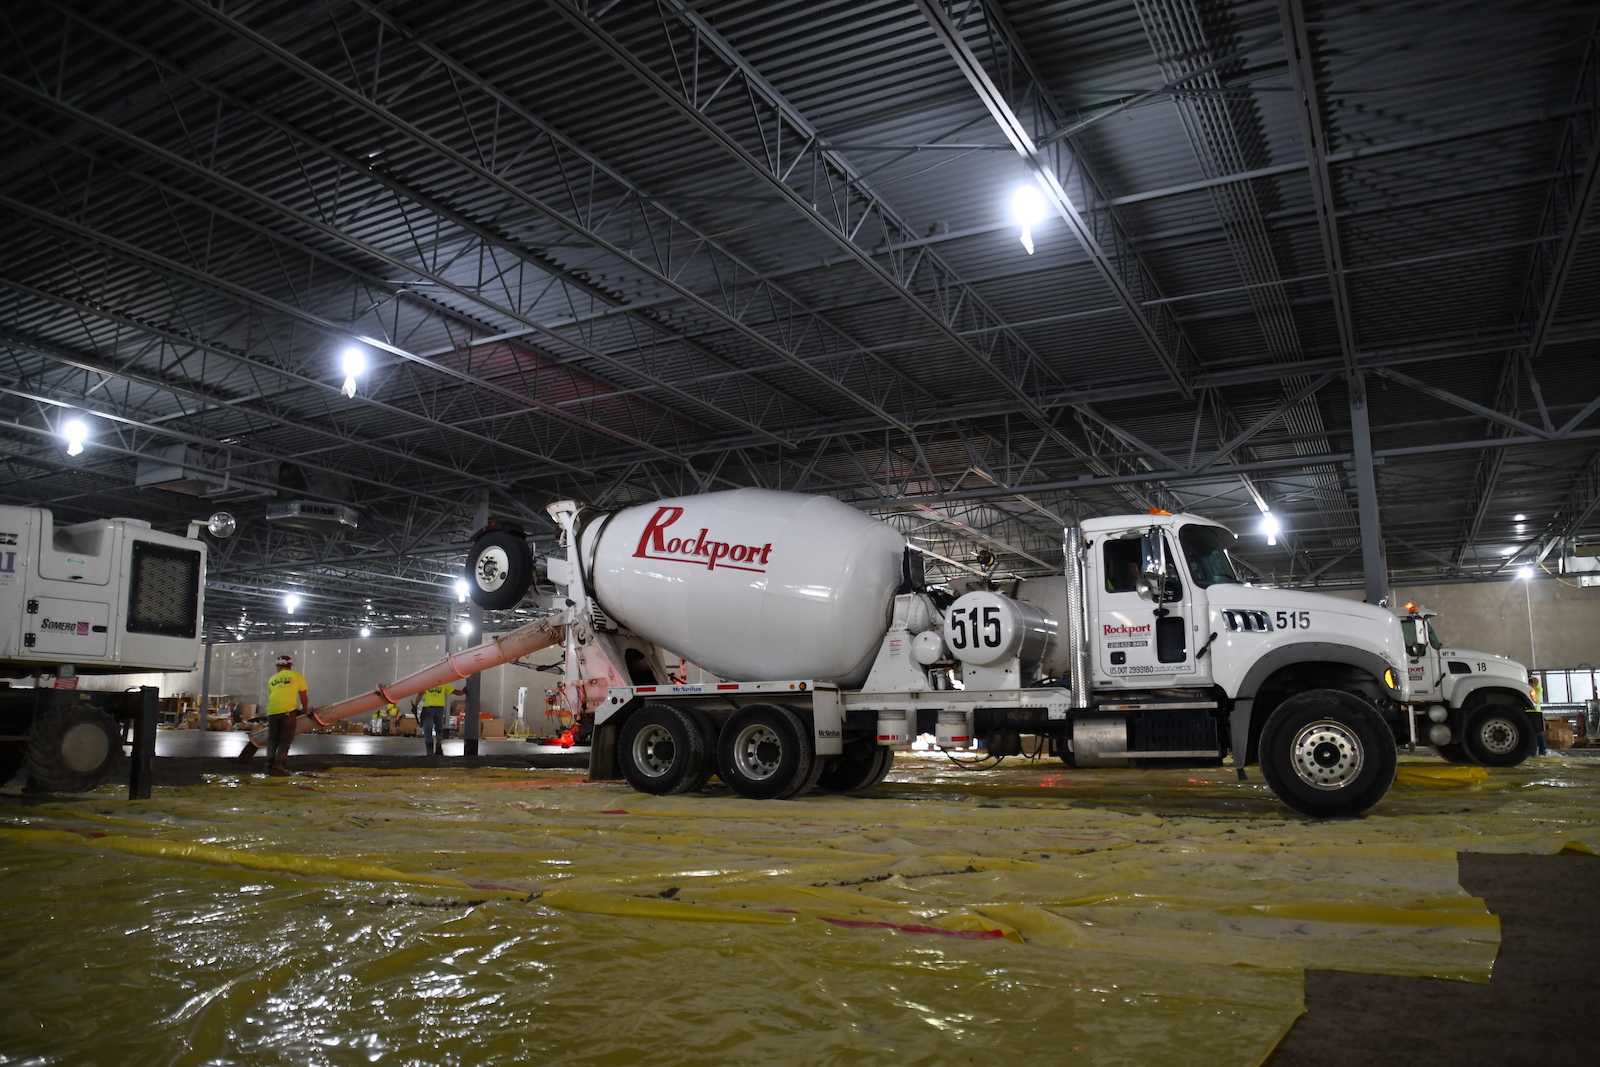 White cement truck with red Rockport logo on side dispensing concrete in warehouse building.